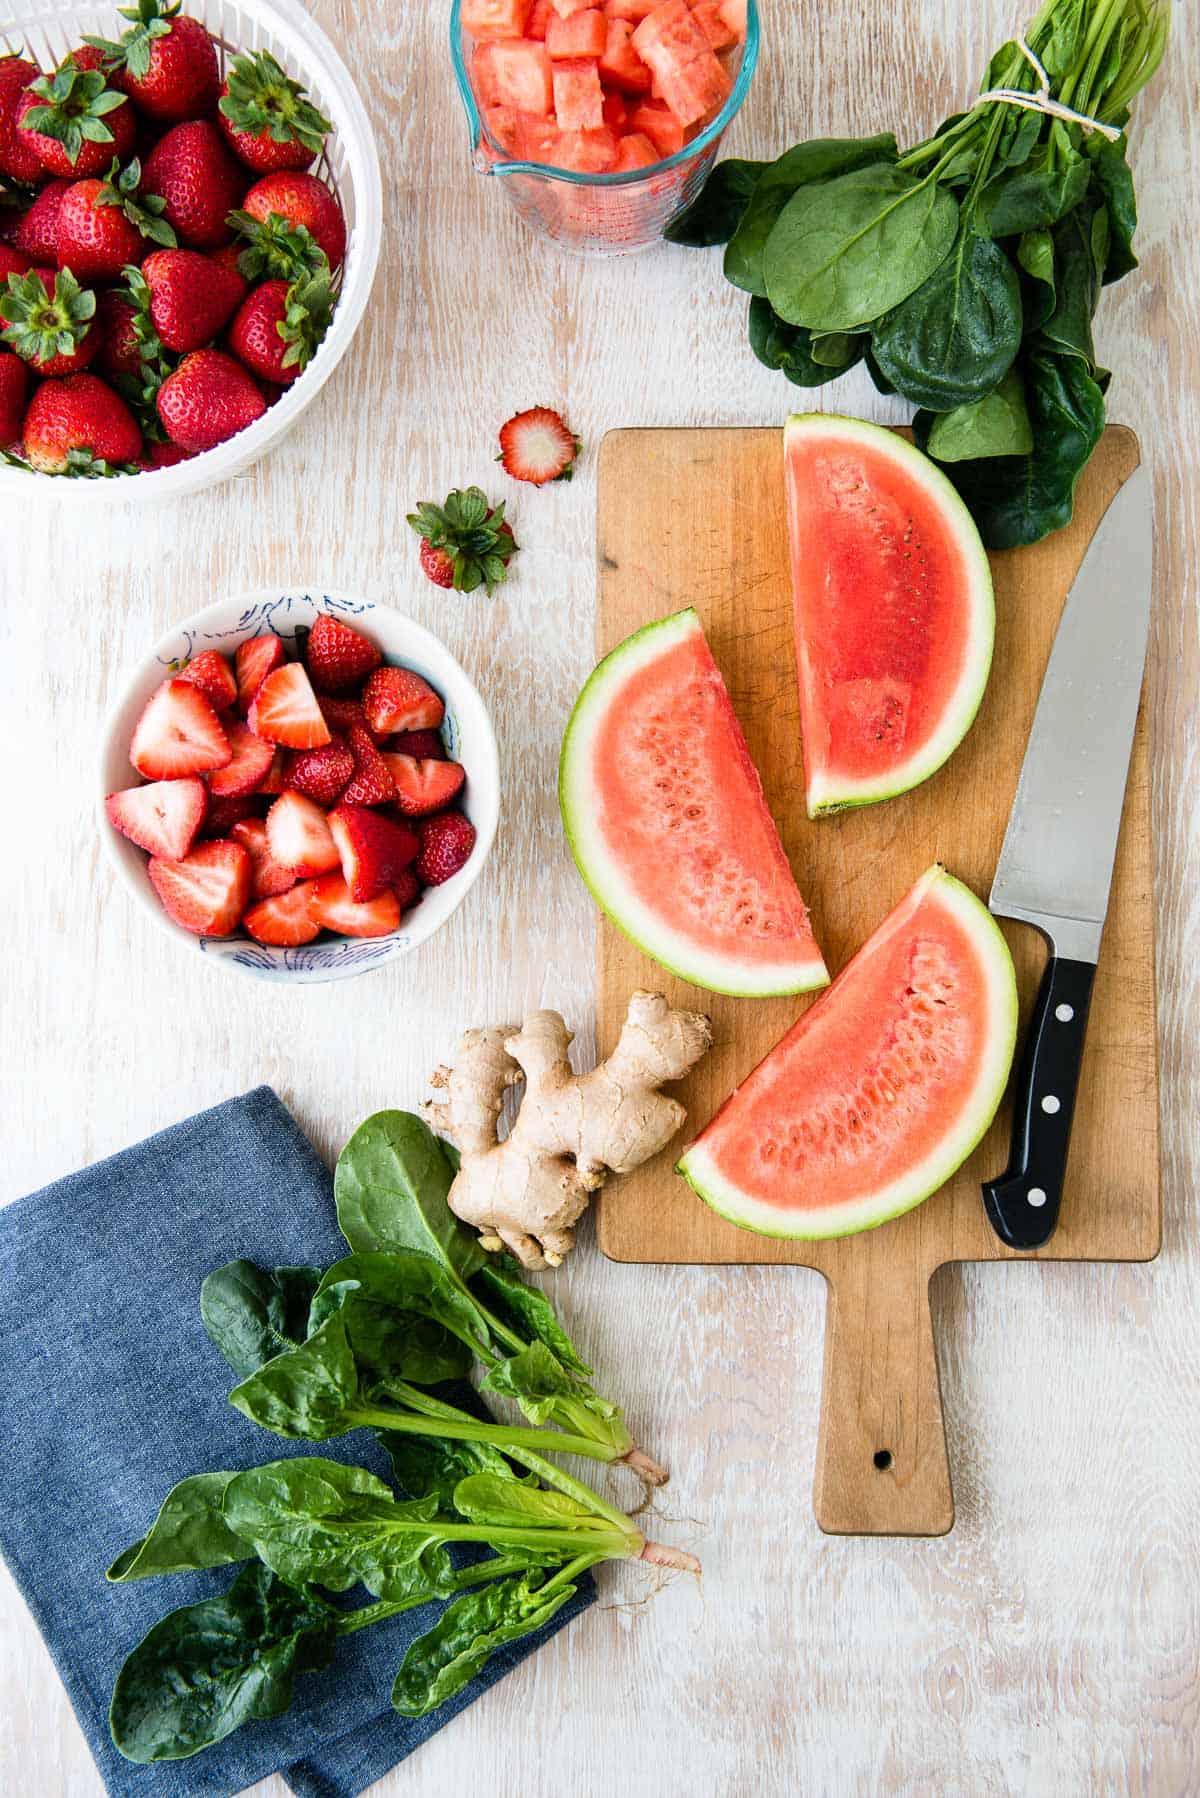 sliced watermelon, strawberries, whole ginger root and spinach leaves getting prepped for a smoothie.